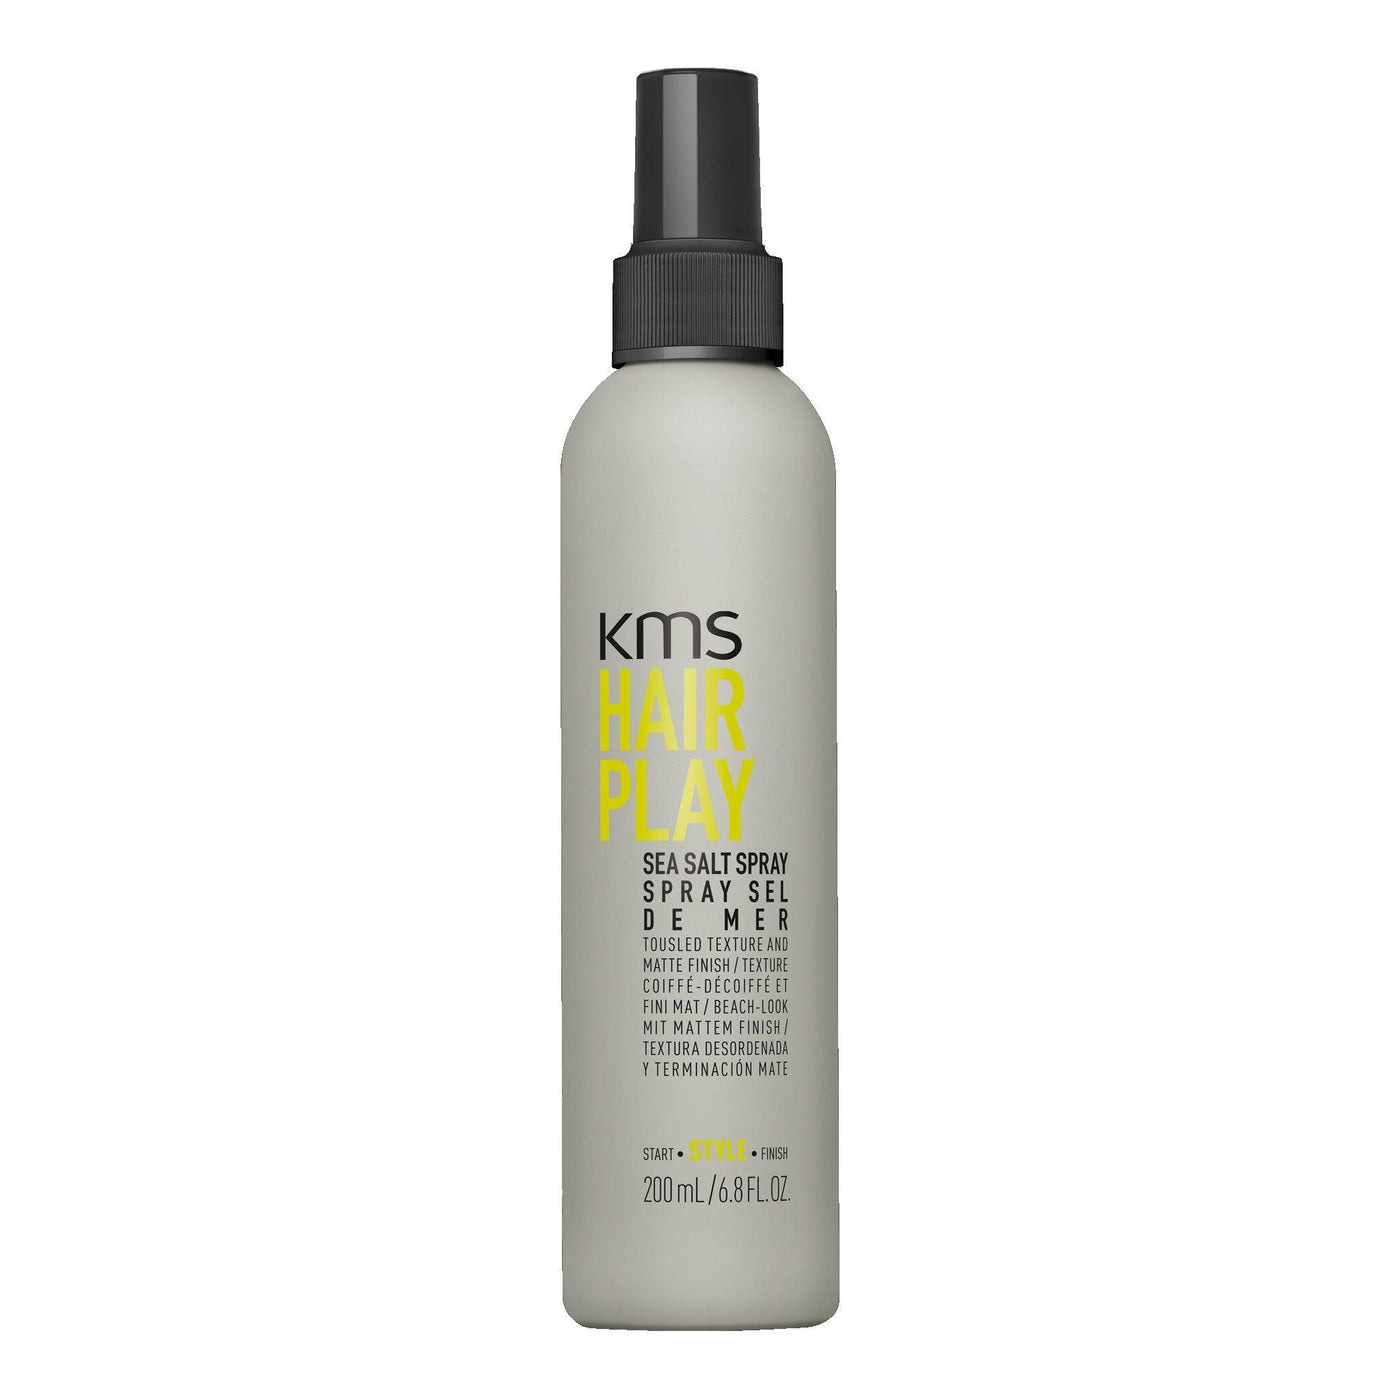 Kms Hairplay Sea Salt Spray 200ml KMS Boutique Deauville